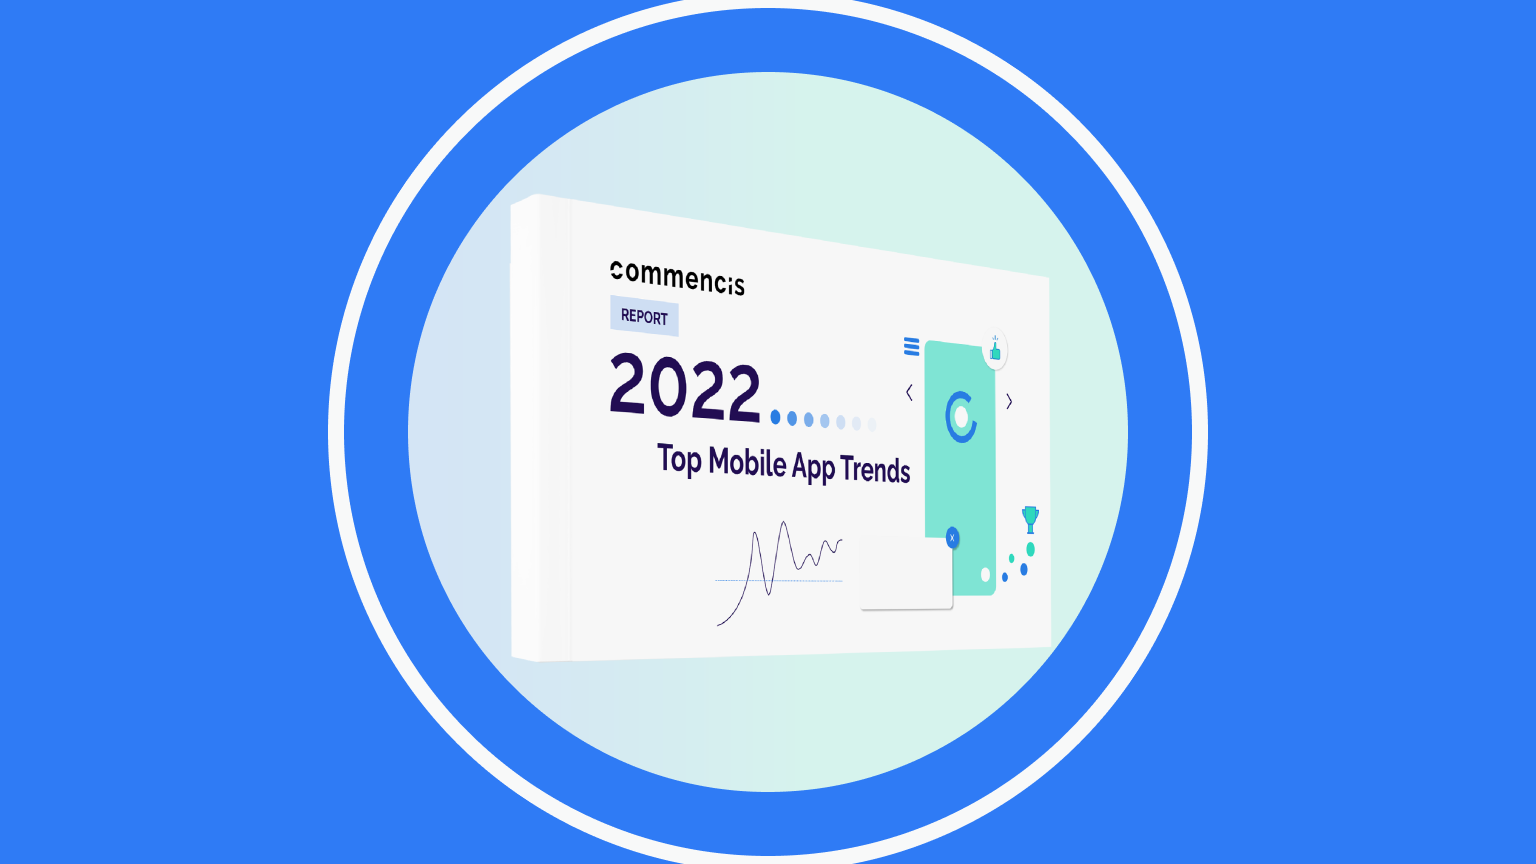 commencis 2022 Top Mobile App Trends report